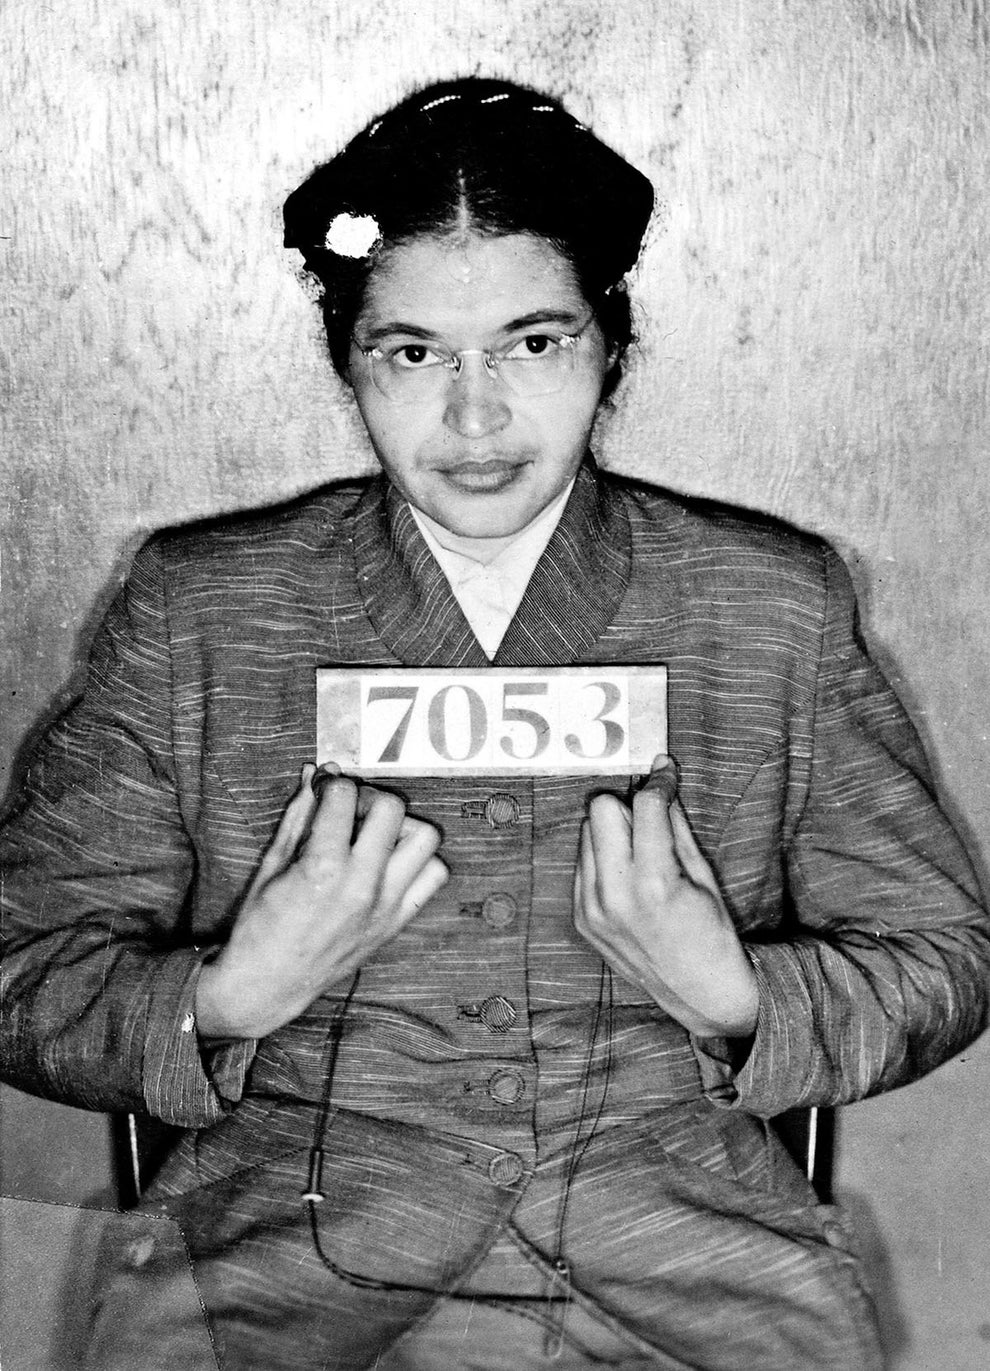 Rosa Parks, activist and icon of American civil rights.